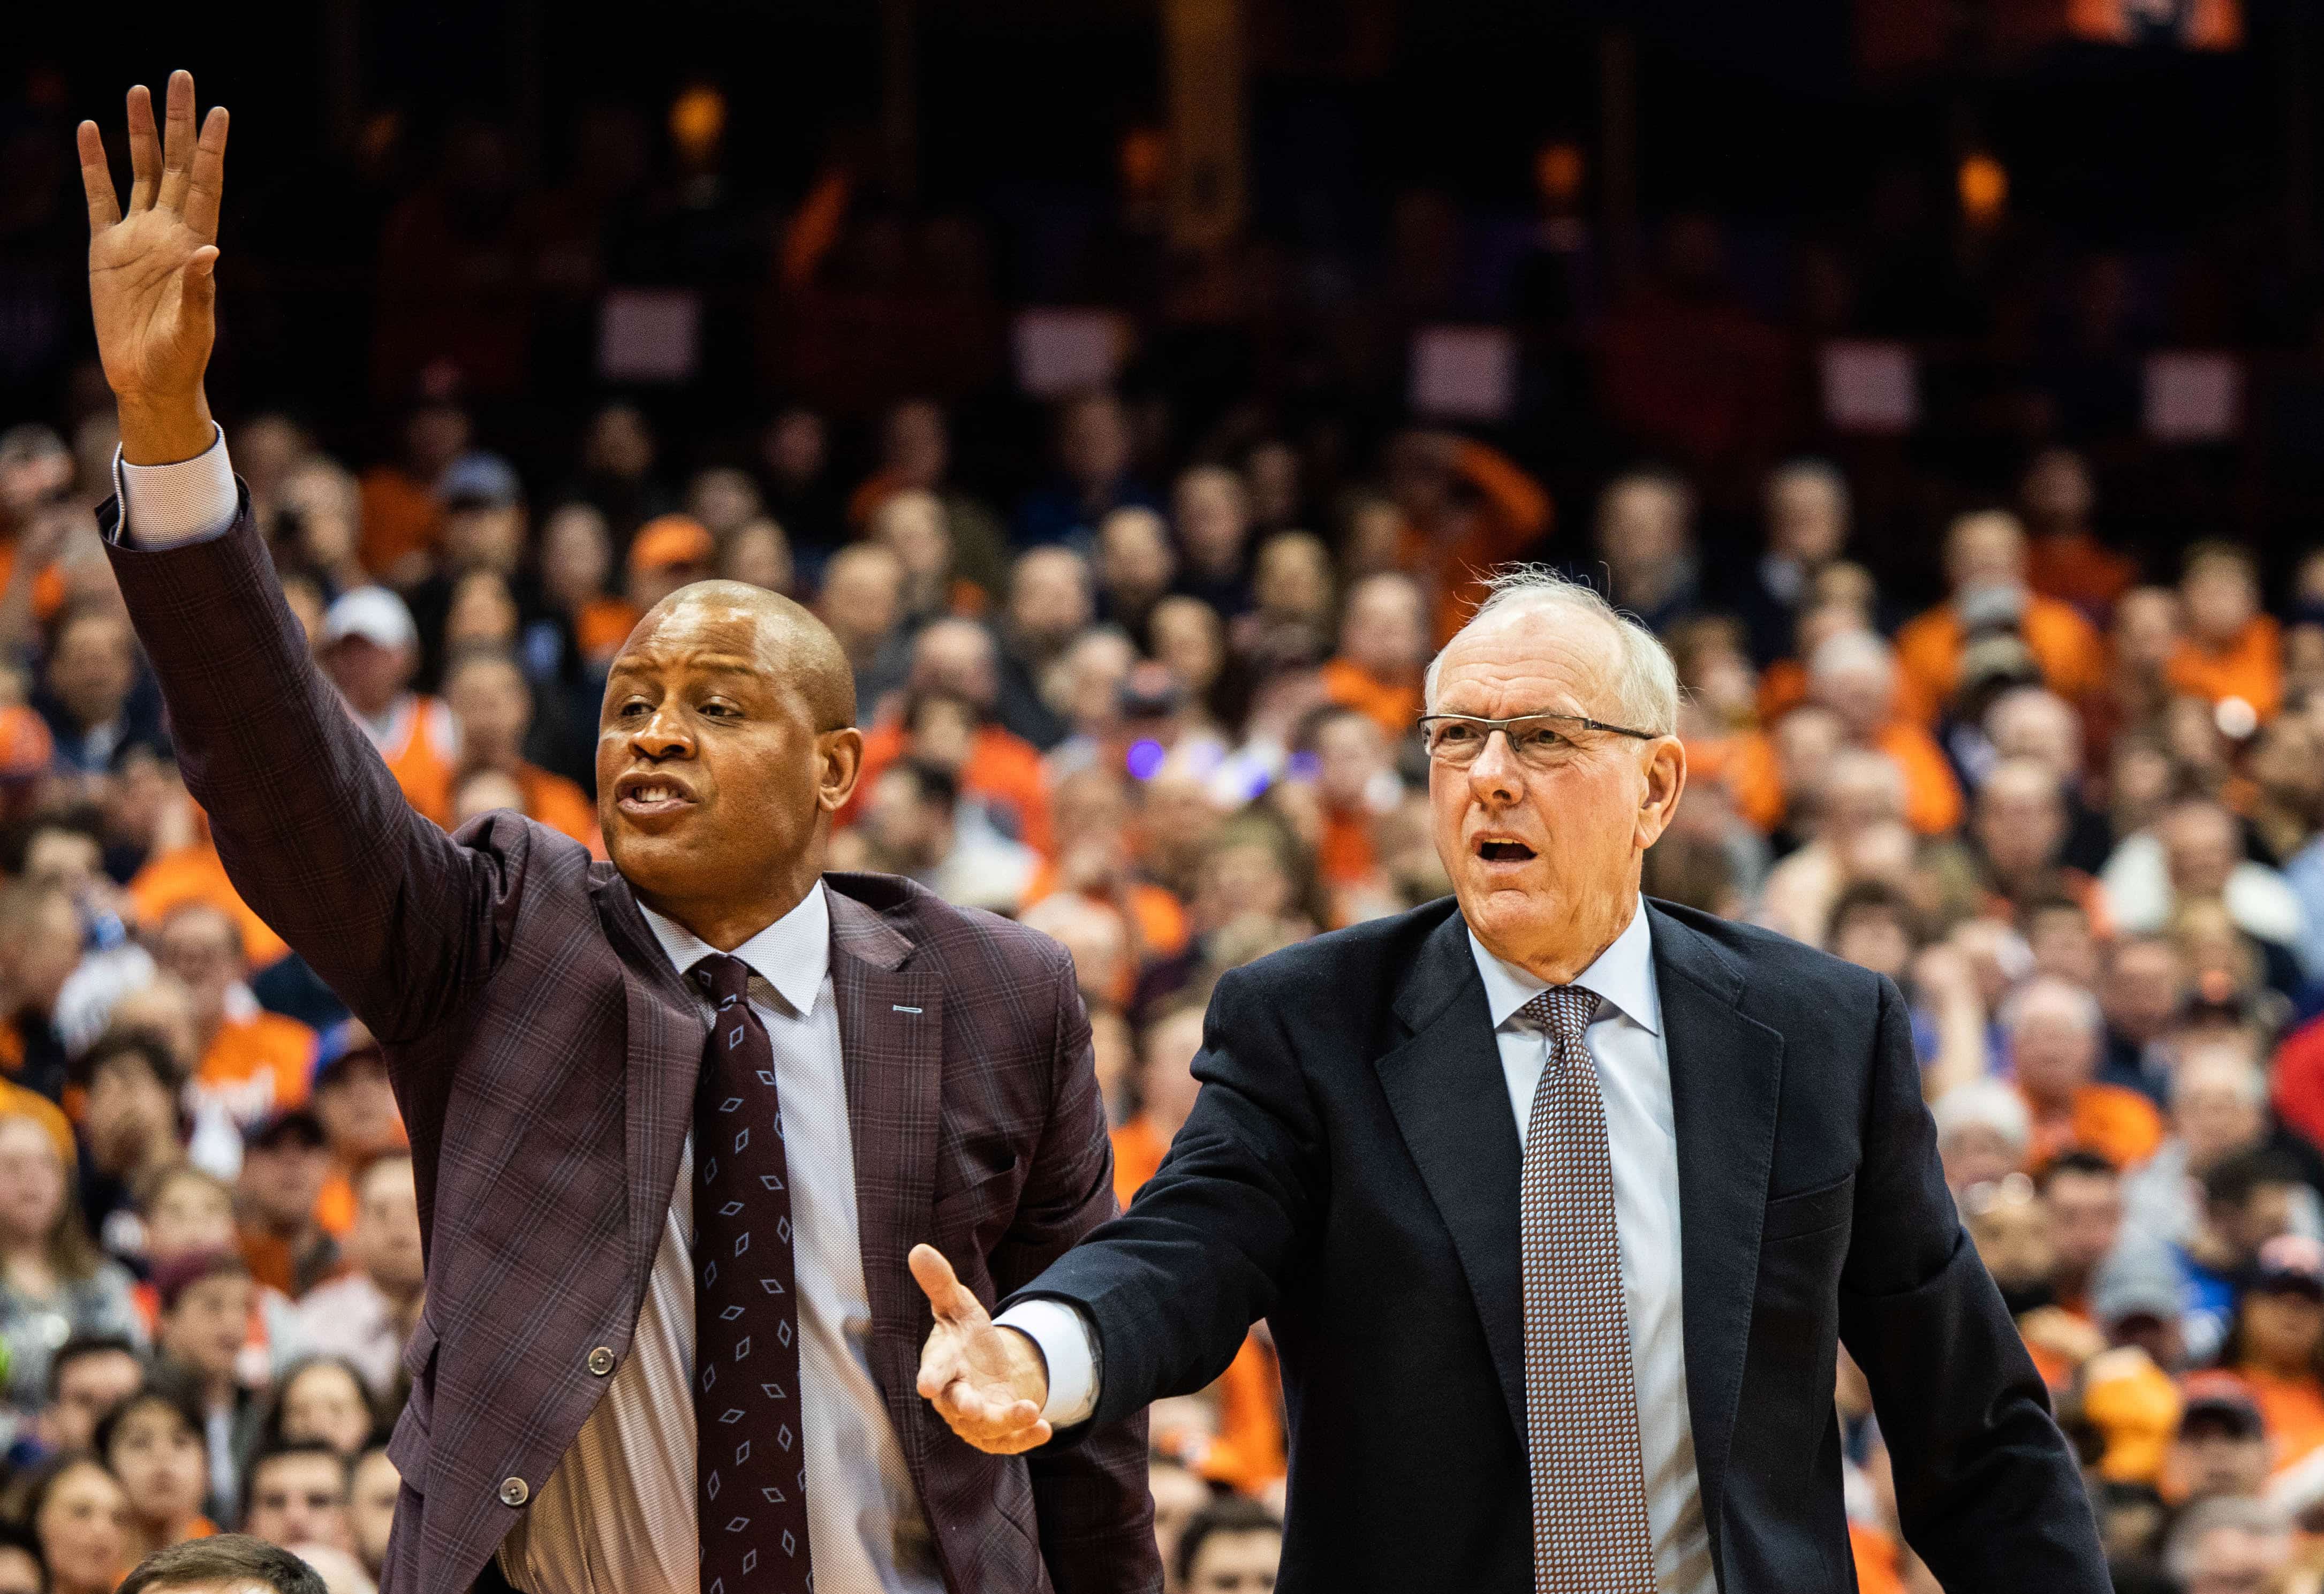 SU associate head coach Adrian Autry joins head coach Jim Boeheim in challenging a referee's call during the SU-Duke on Feb. 23, 2019 in the Carrier Dome.